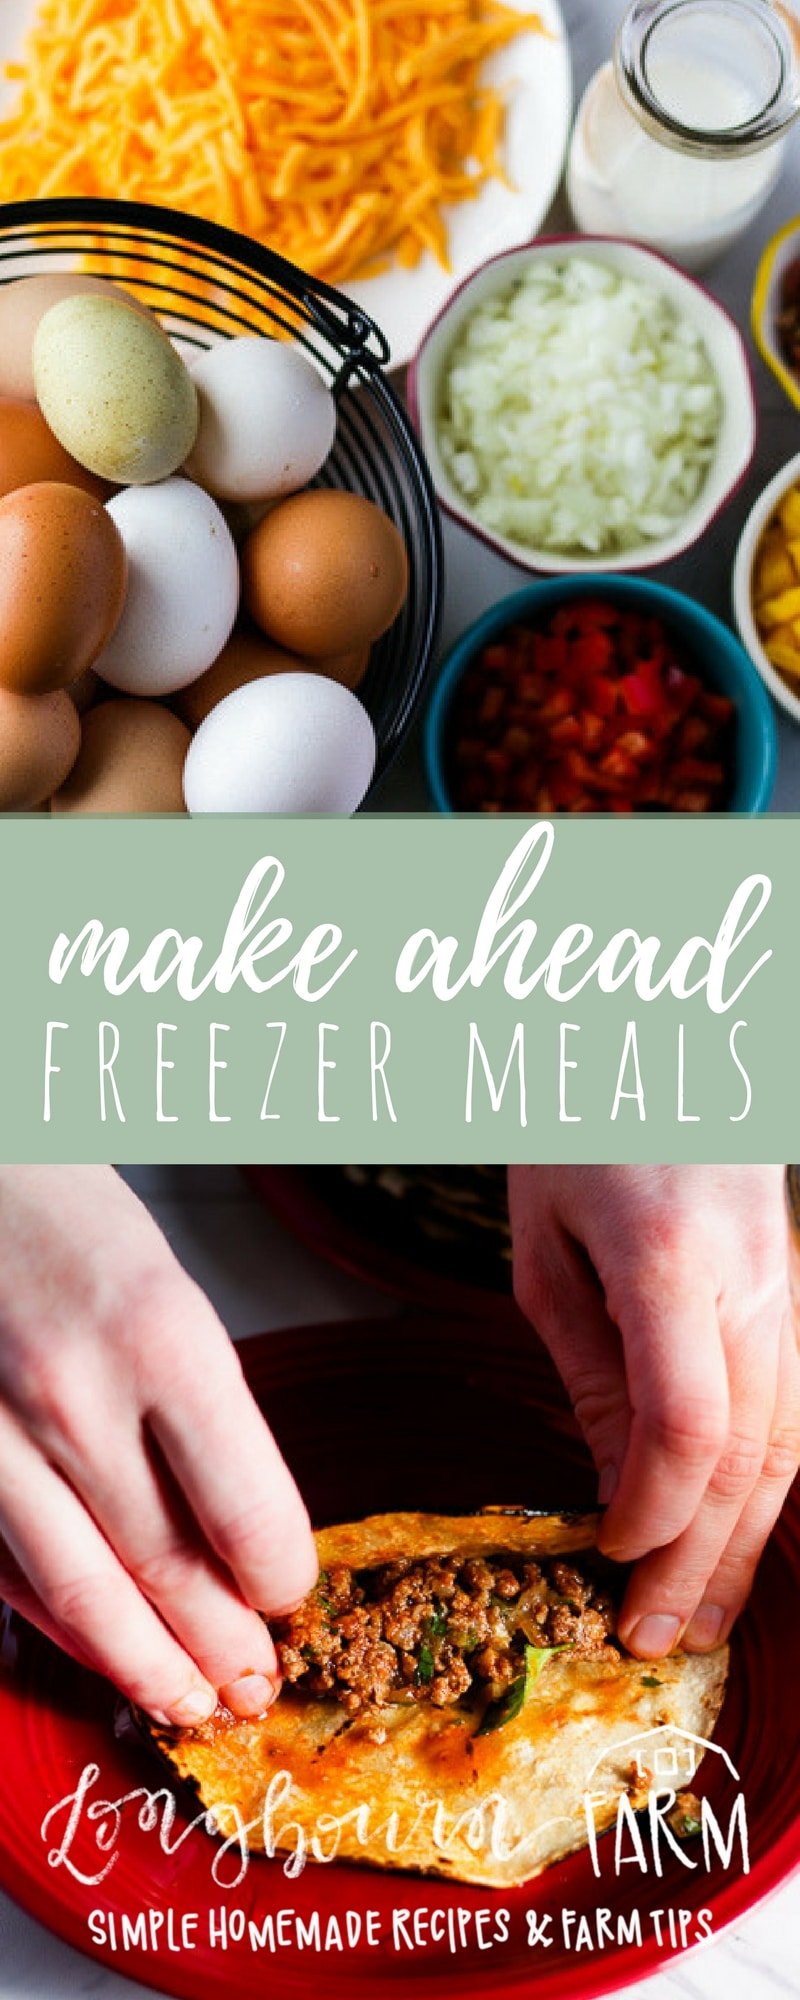 Make ahead freezer meals are a fantastic way to always have a homemade dinner on the table, even on busy days where cooking isn't an option. Get the details on stocking your freezer, great freezer meal ideas, and how to make any meal a freezer meal! #makeaheadmeal #freezermeal #freezermeals #makeahead #easydinner #fastdinner #mealprep #dinnerprep